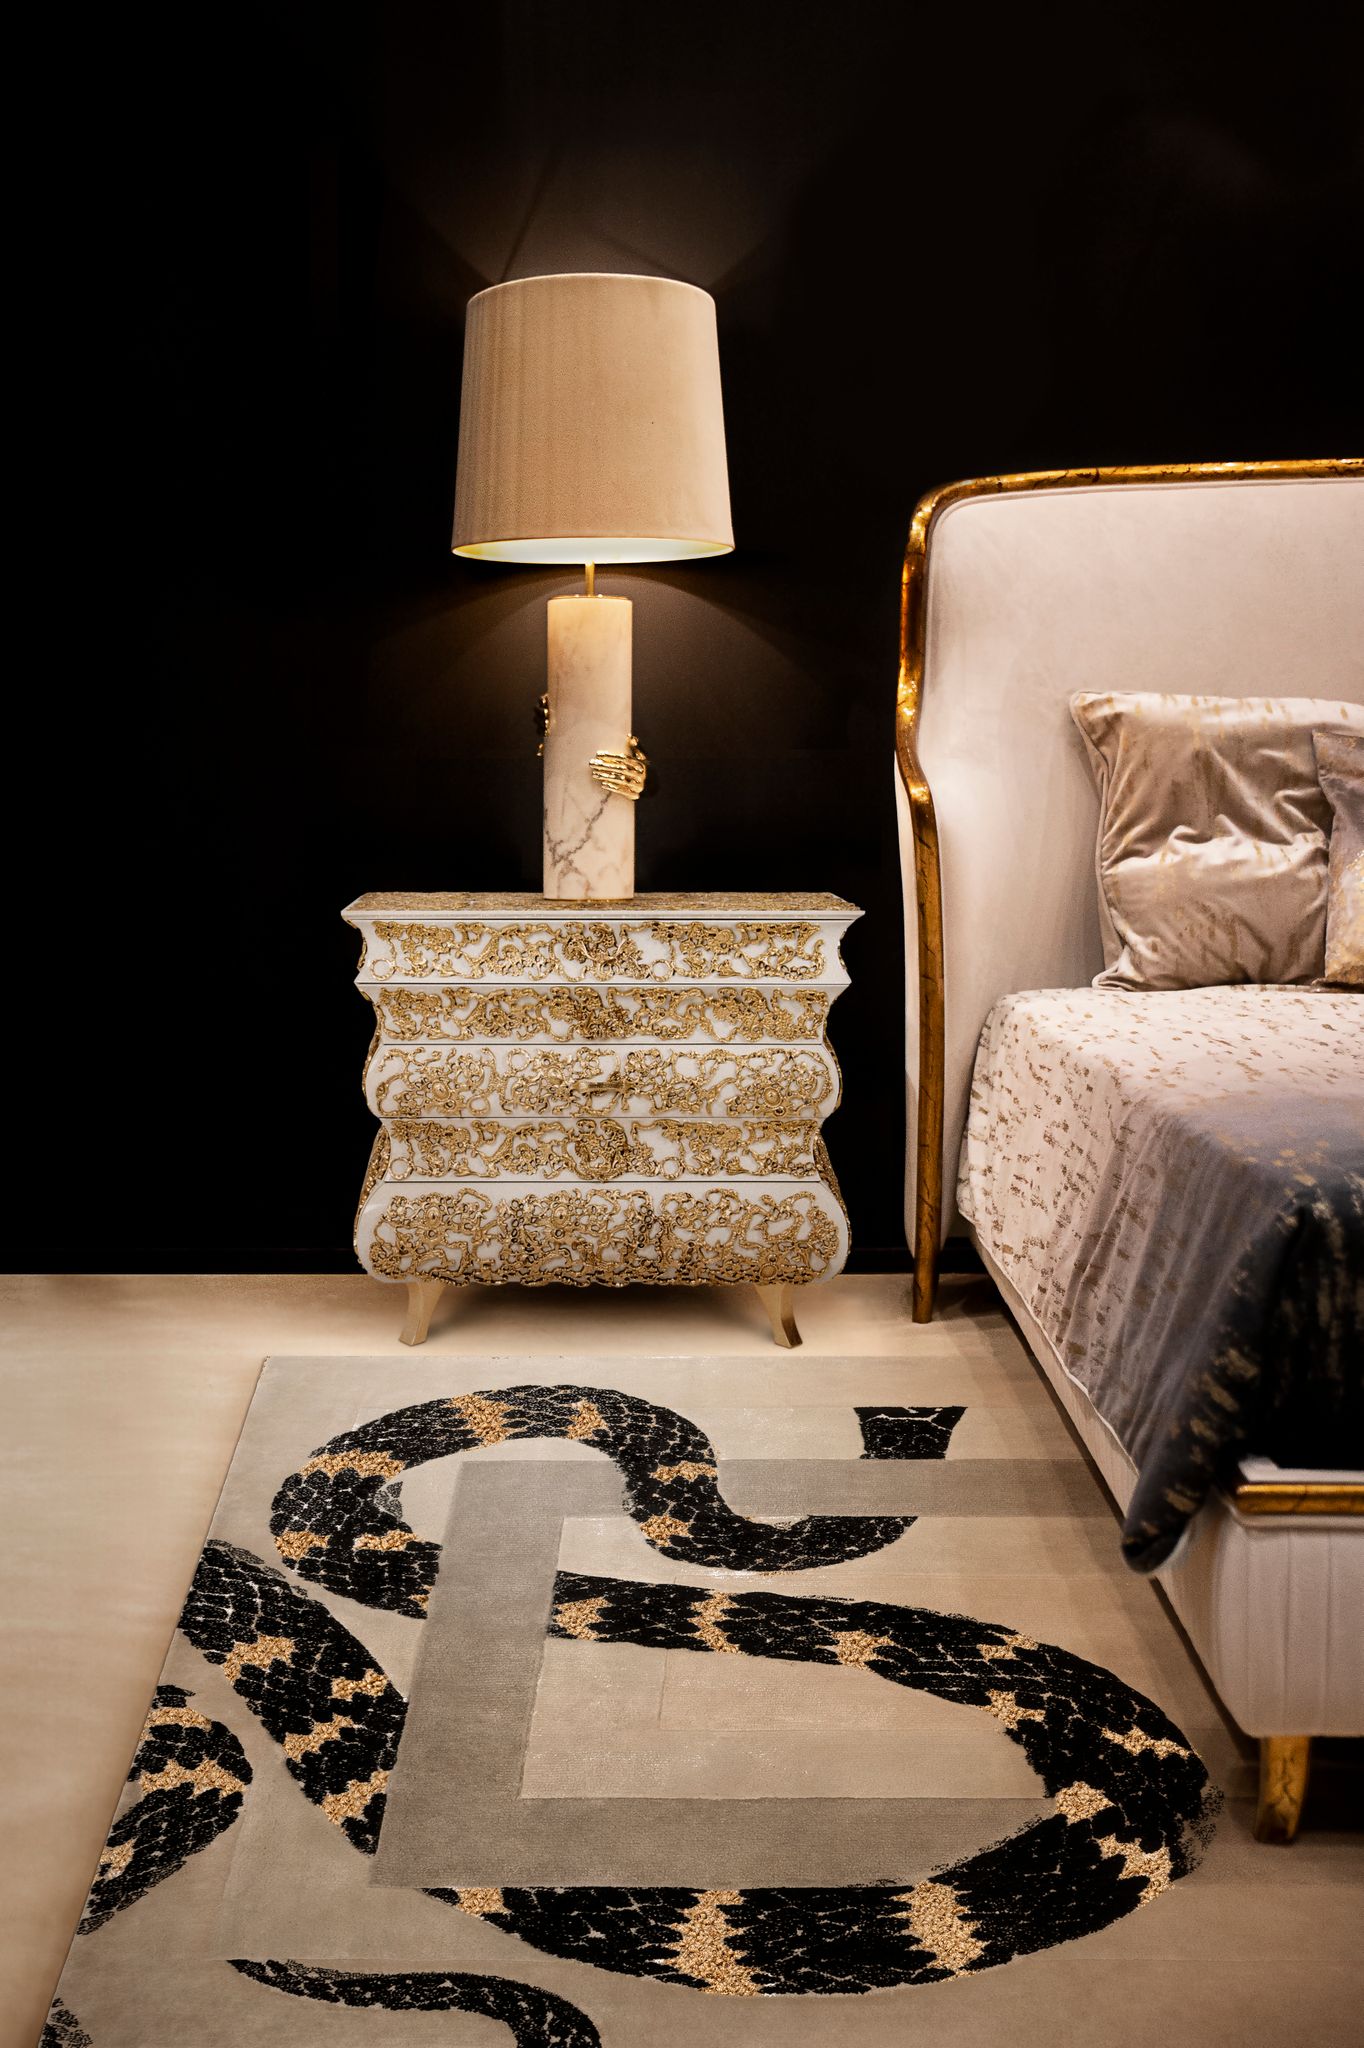 Luxurious Bedroom With Imperial Snake Rug by Rug'Society